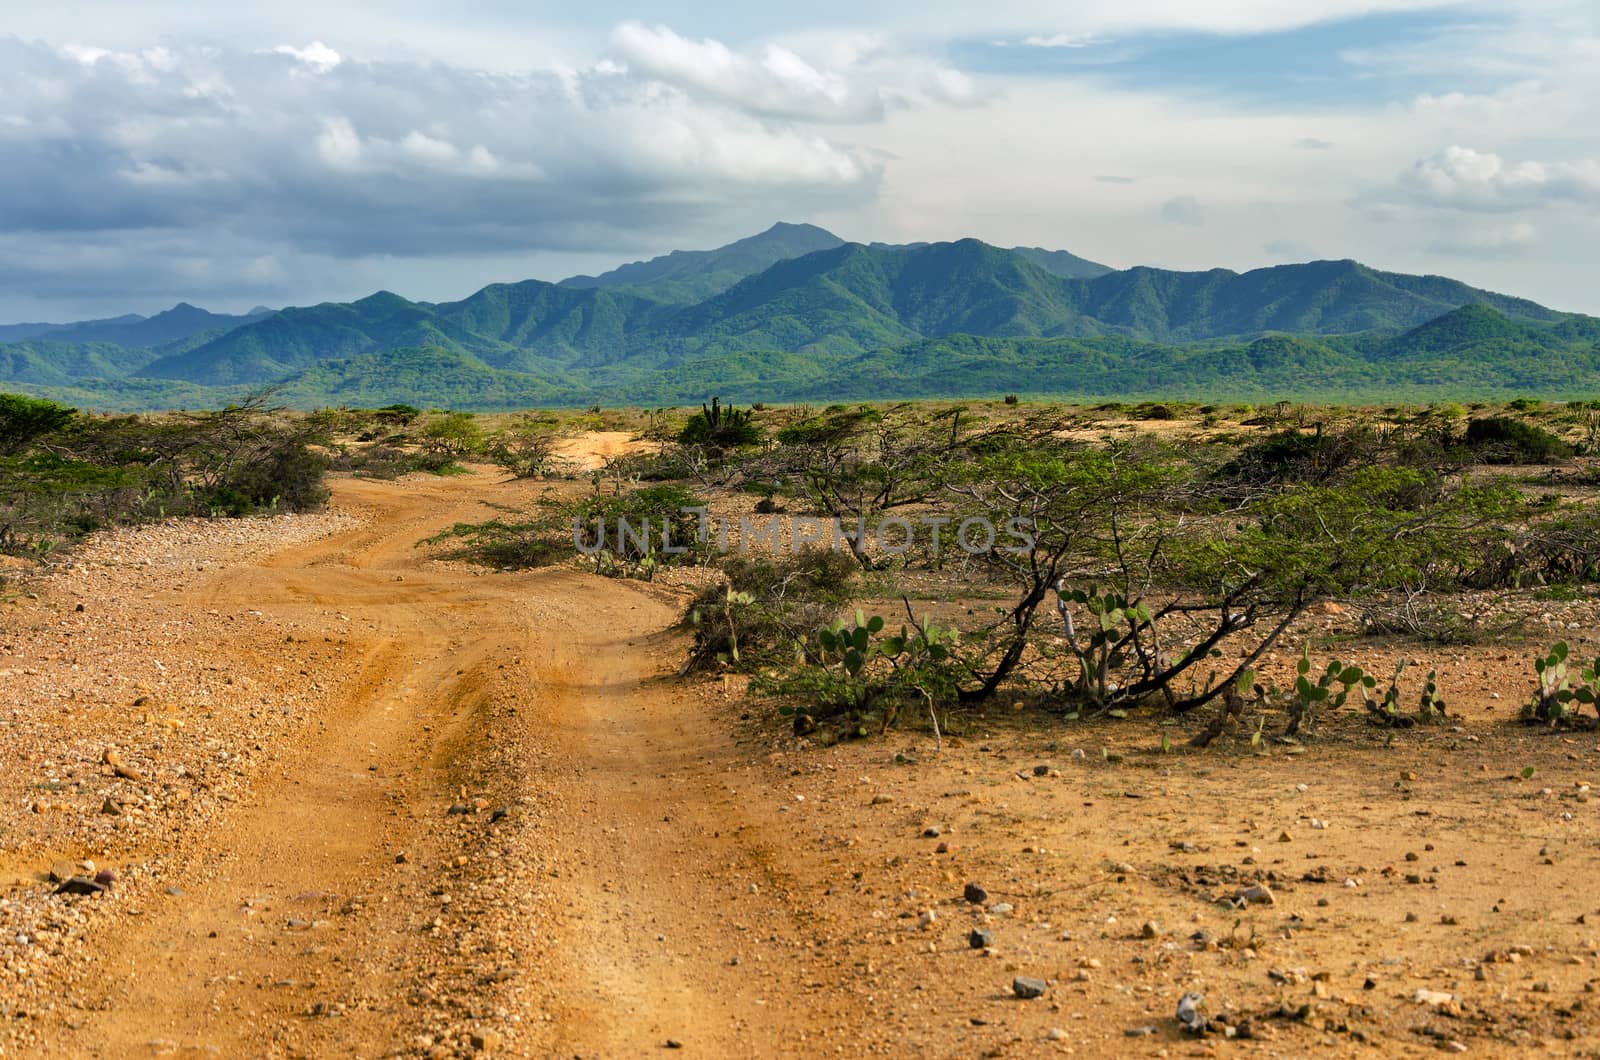 Dirt road passing through a desert with the lush green hills of Macuira National Park visible in the background in La Guajira, Colombia